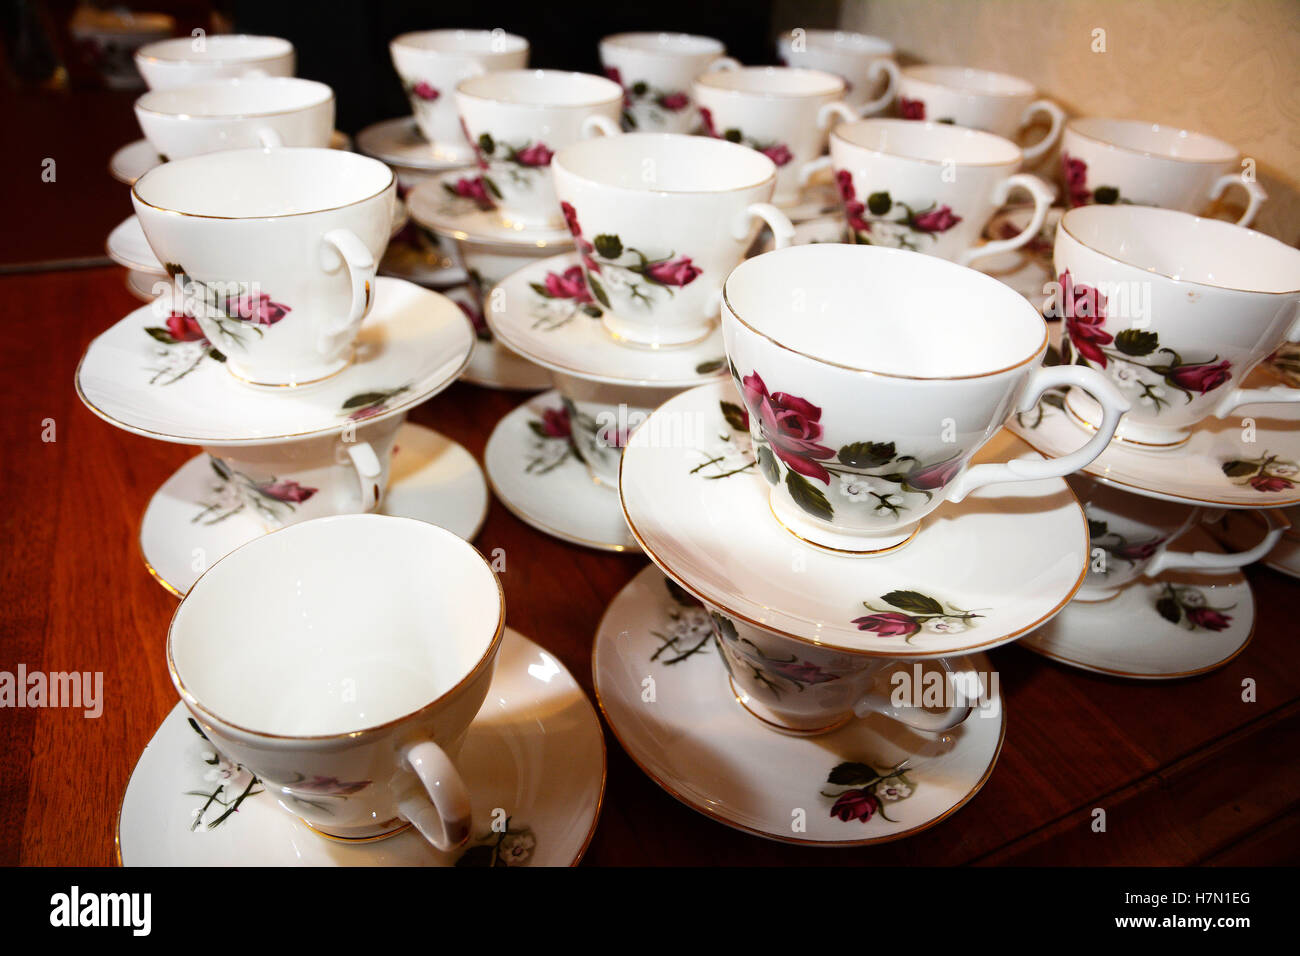 Bone china T cups stacked in the Town Council building in Walsall, UK. Stock Photo